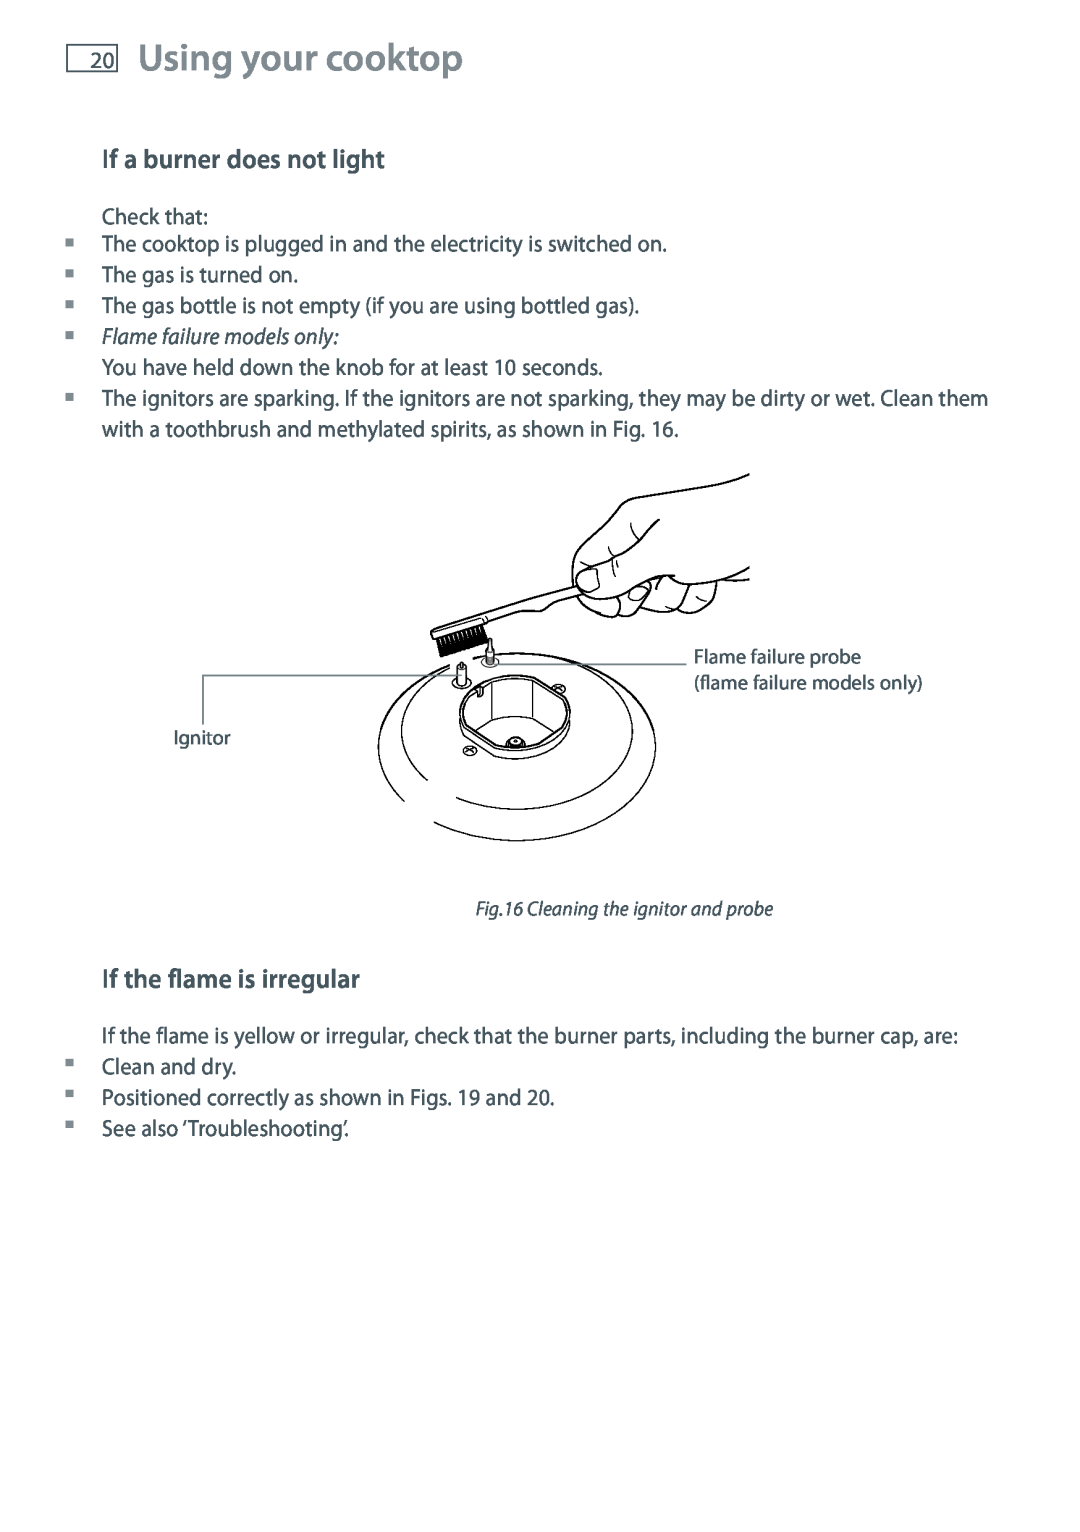 Fisher & Paykel CG604 installation instructions If a burner does not light, If the flame is irregular, Using your cooktop 